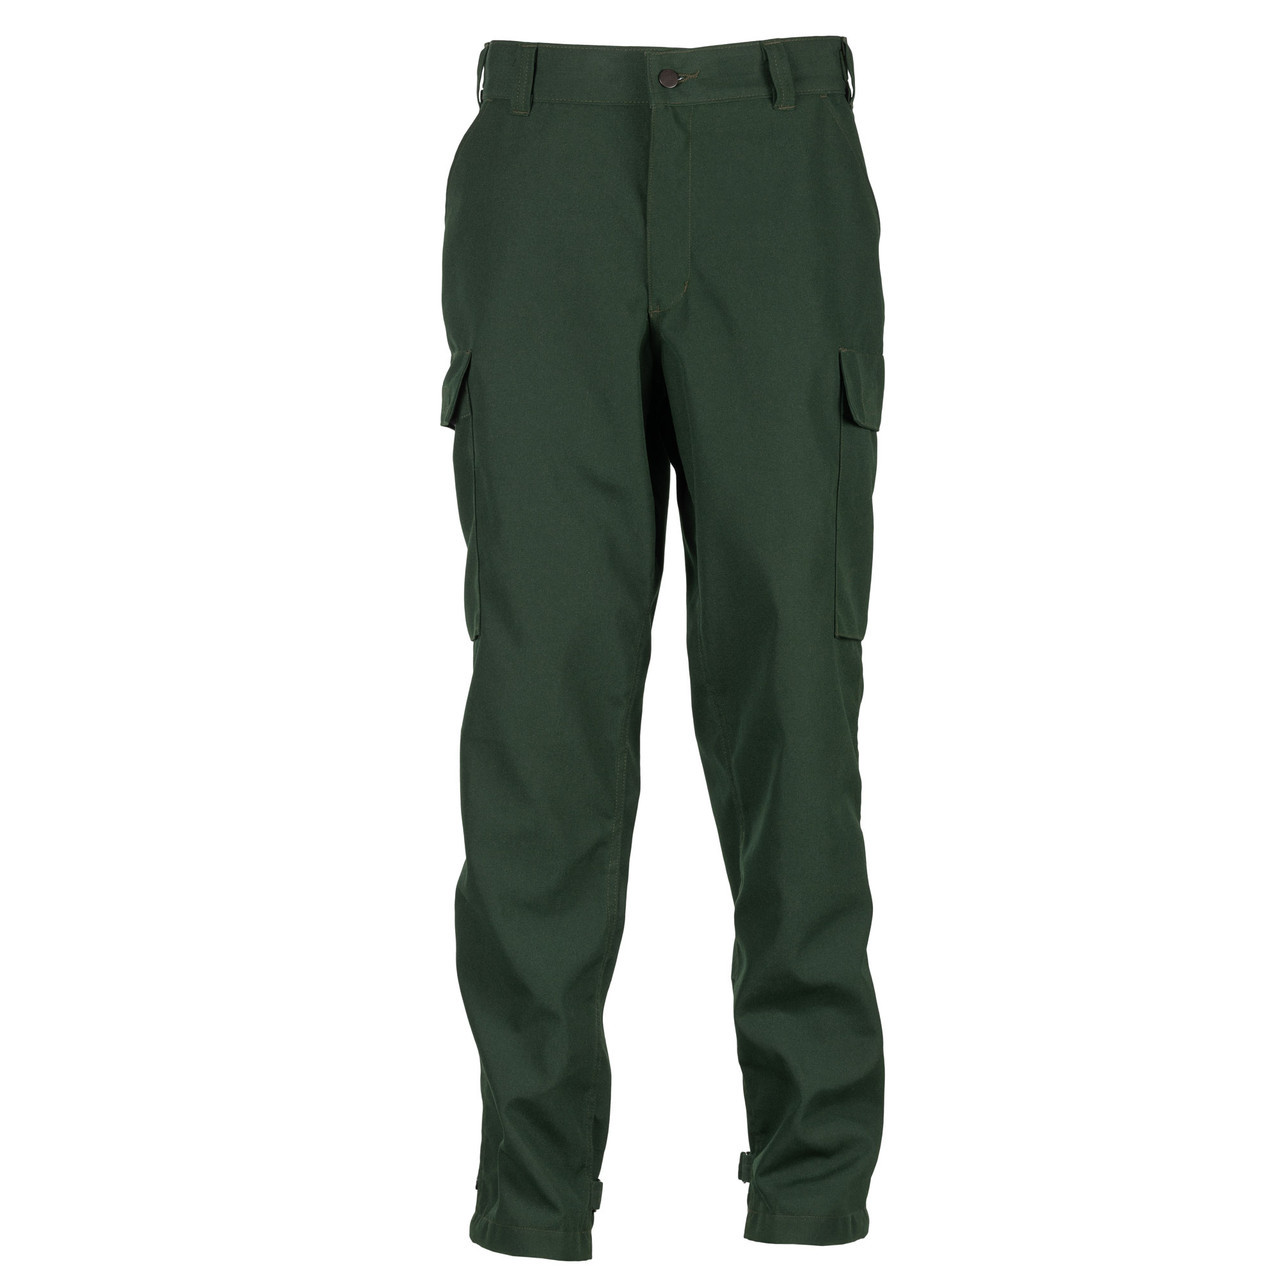 True North Wildland Pant - Pro - Clearance